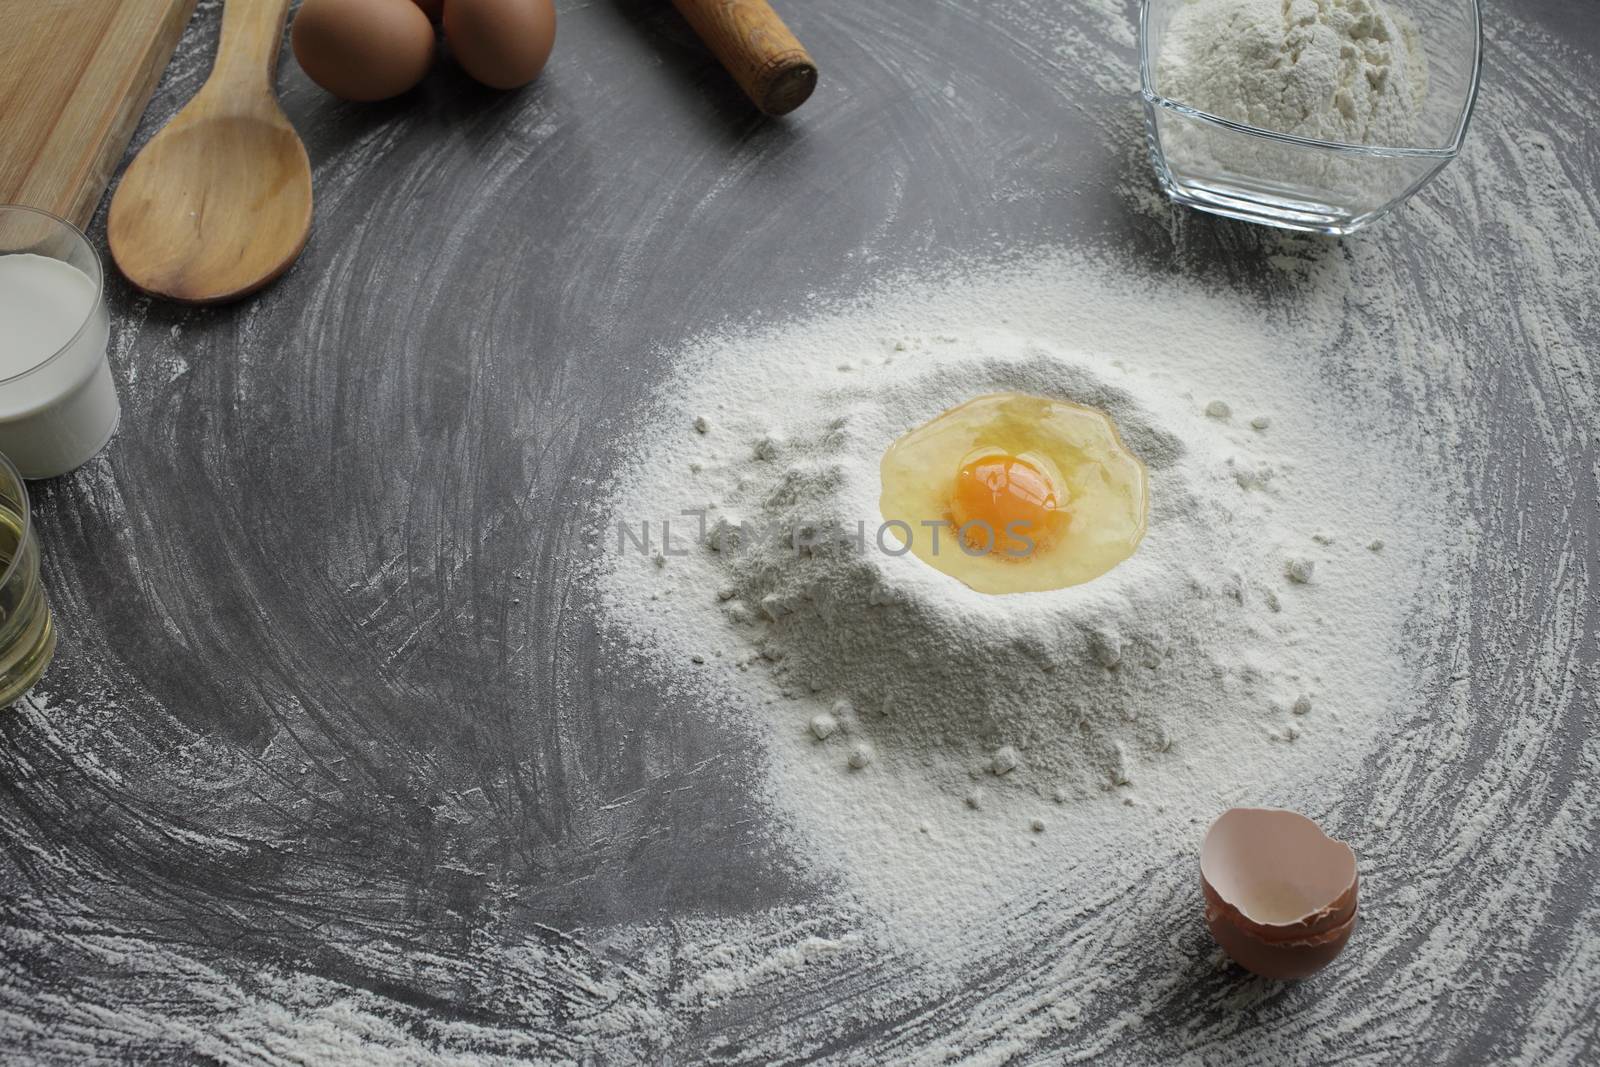 Broken chicken egg in a pile of flour, olive oil, milk, kitchen tool, gray table by selinsmo